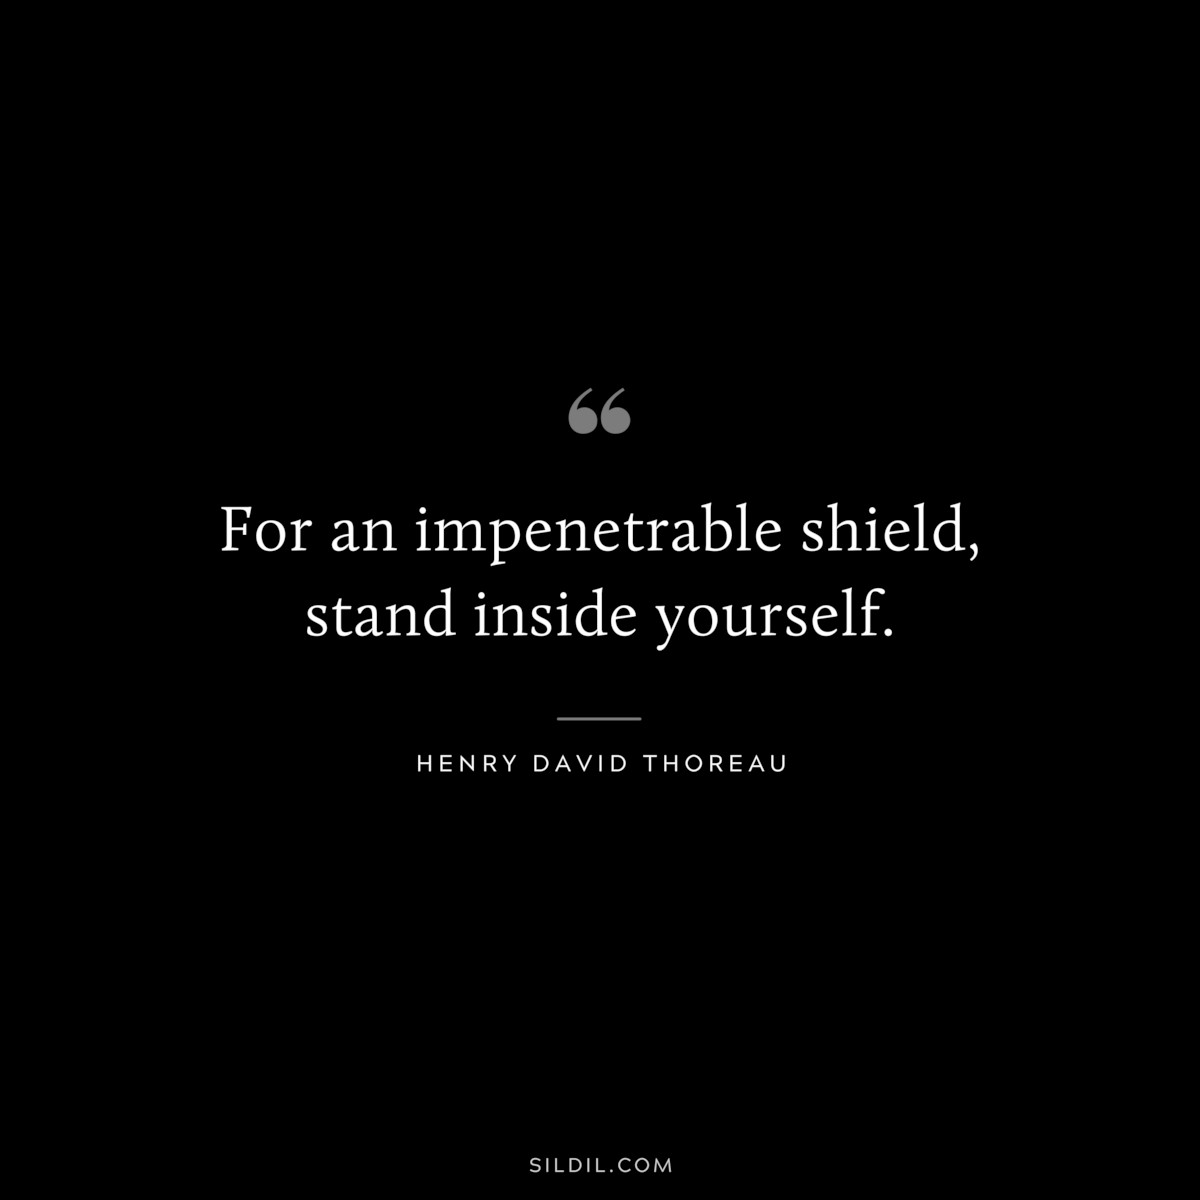 For an impenetrable shield, stand inside yourself. — Henry David Thoreau